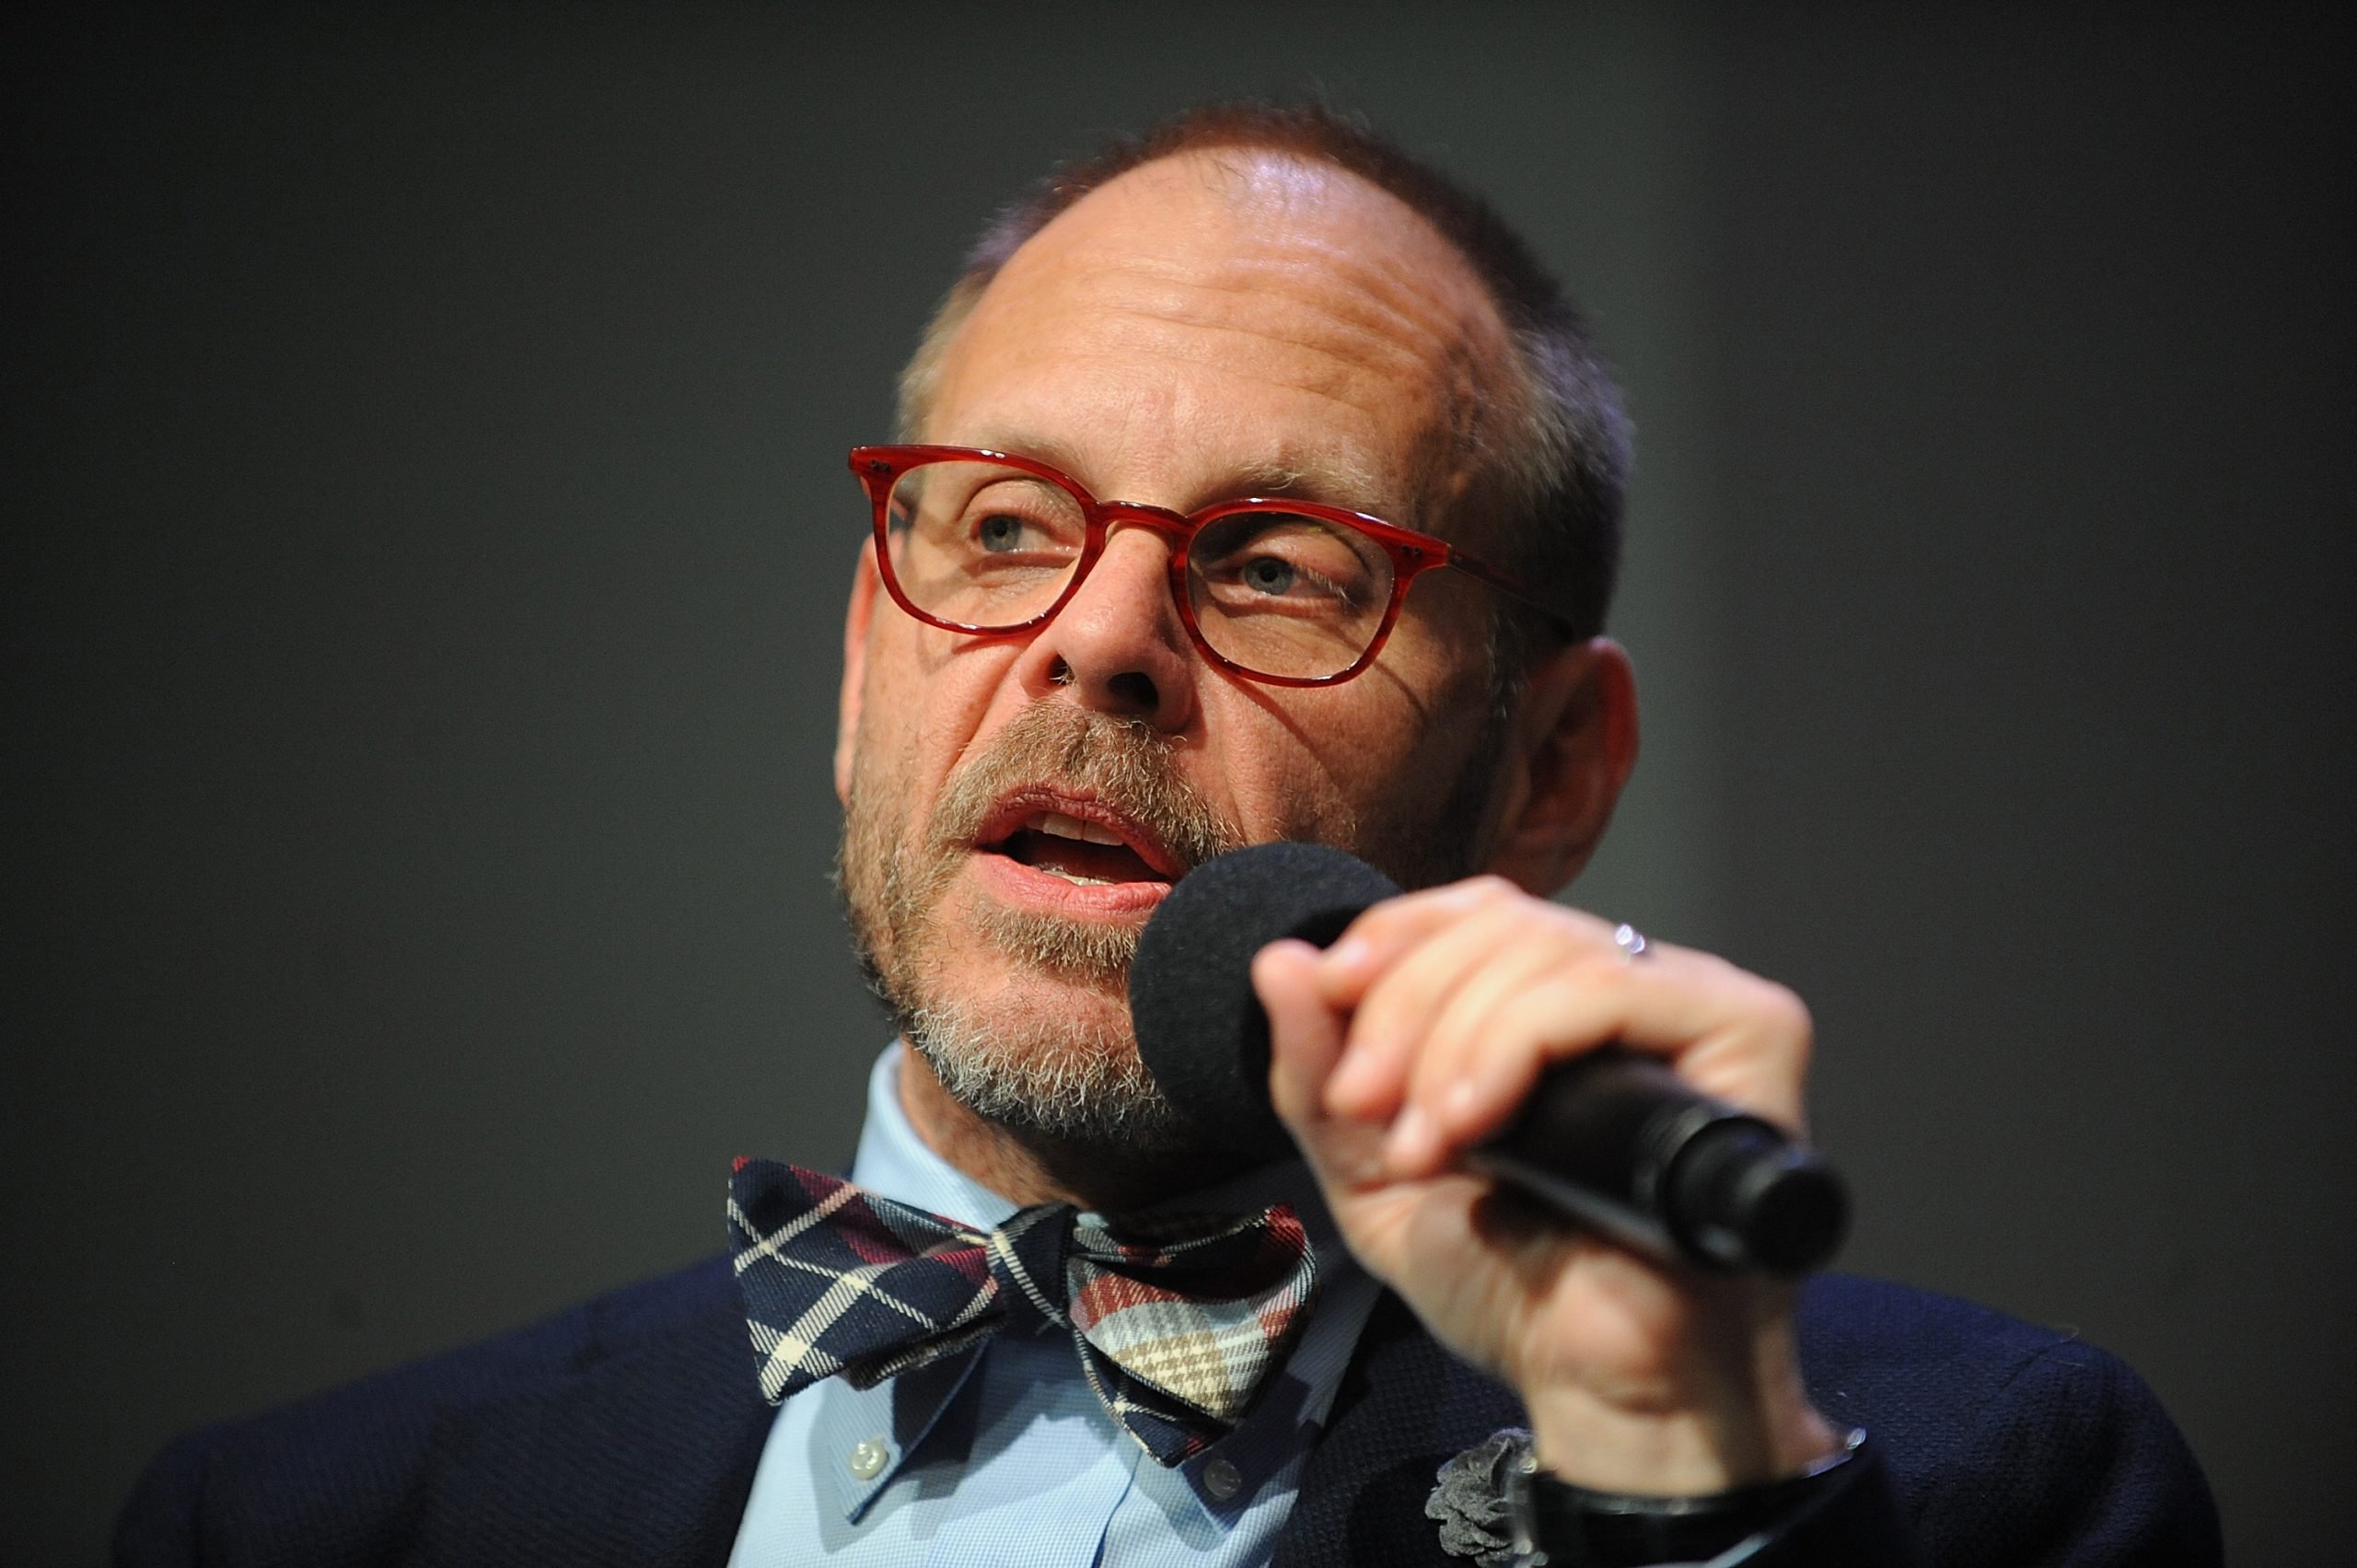 Chef Alton Brown wears a bow tie and suit in this photograph.